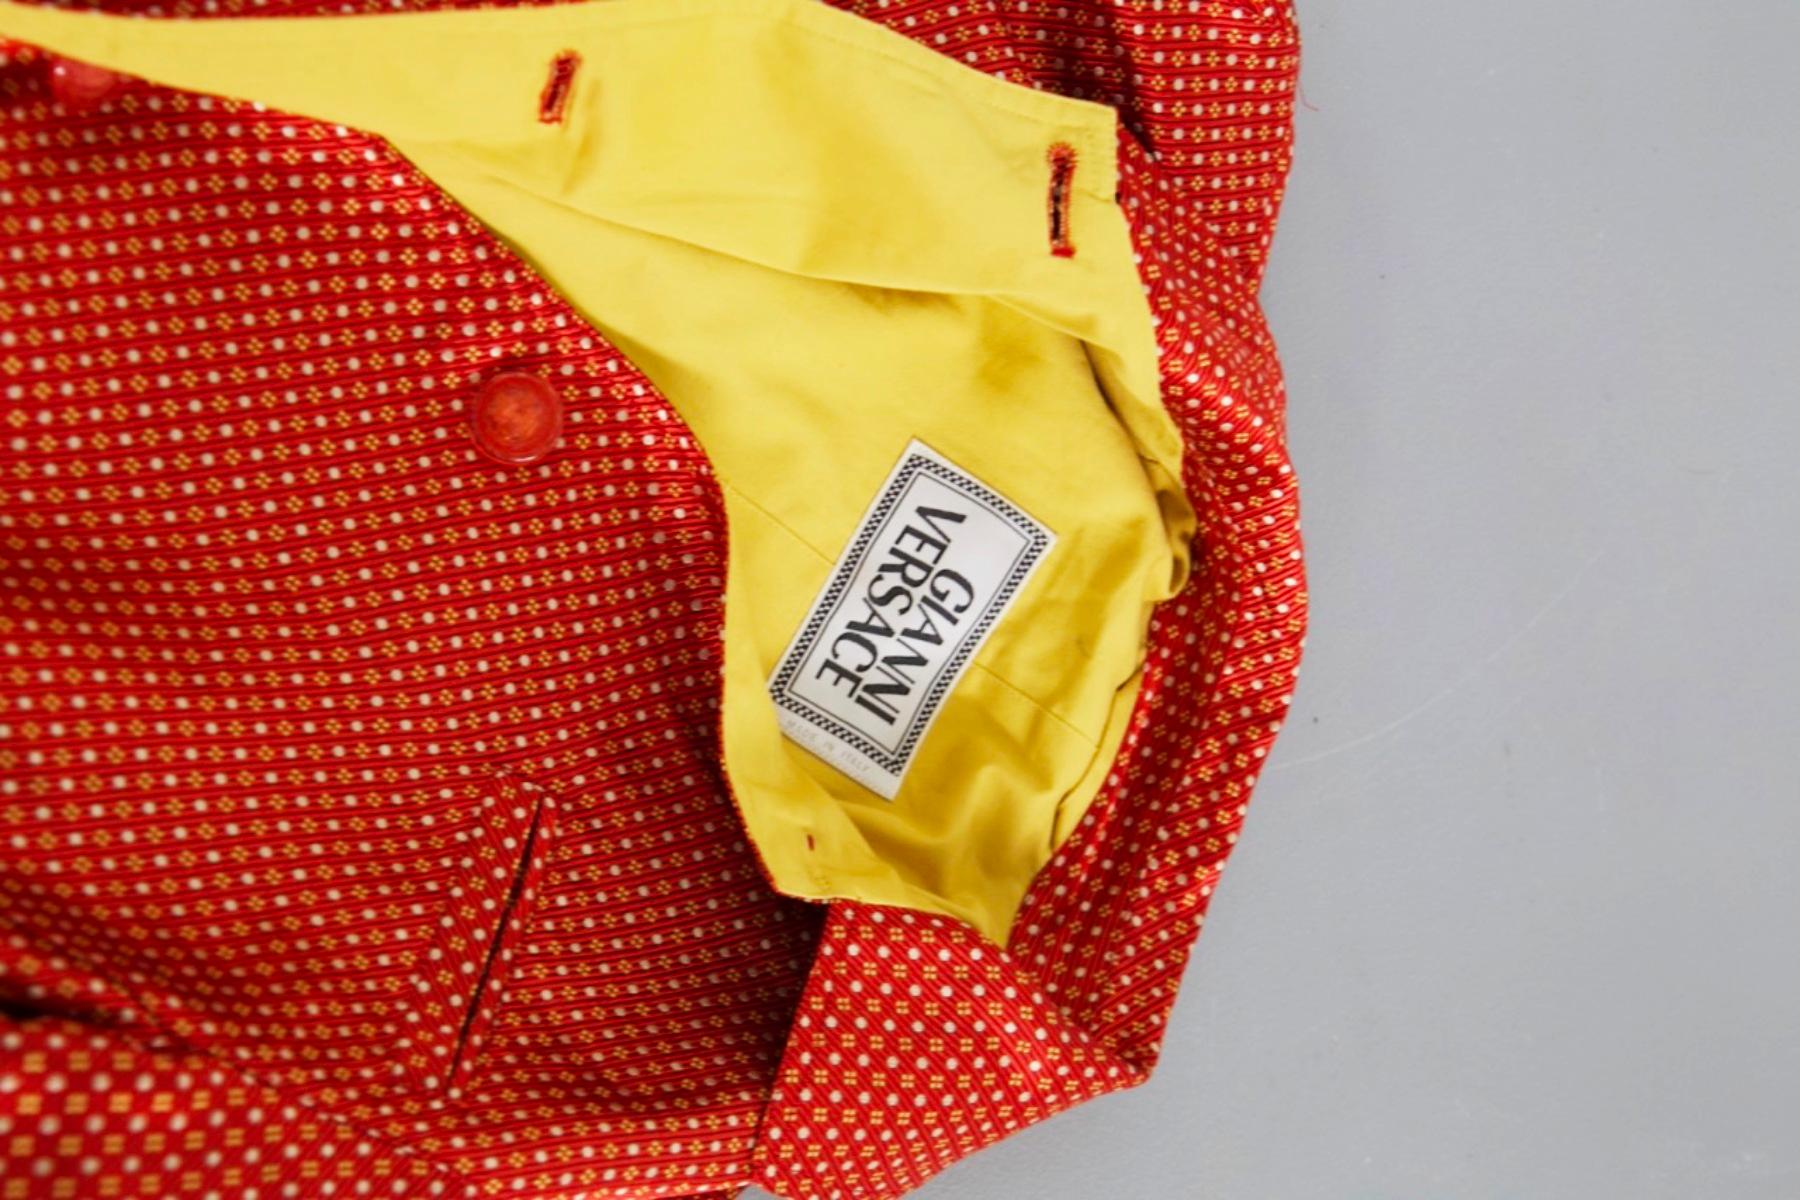 Beautiful vintage blazer designed by Gianni Versace in the 1990s, made in Italy.
ORIGINAL LABEL.
The blazer is made entirely of red cotton, with yellow square weave. The interior is fully lined in lemon yellow, very flashy.
The blazer has a belt apt